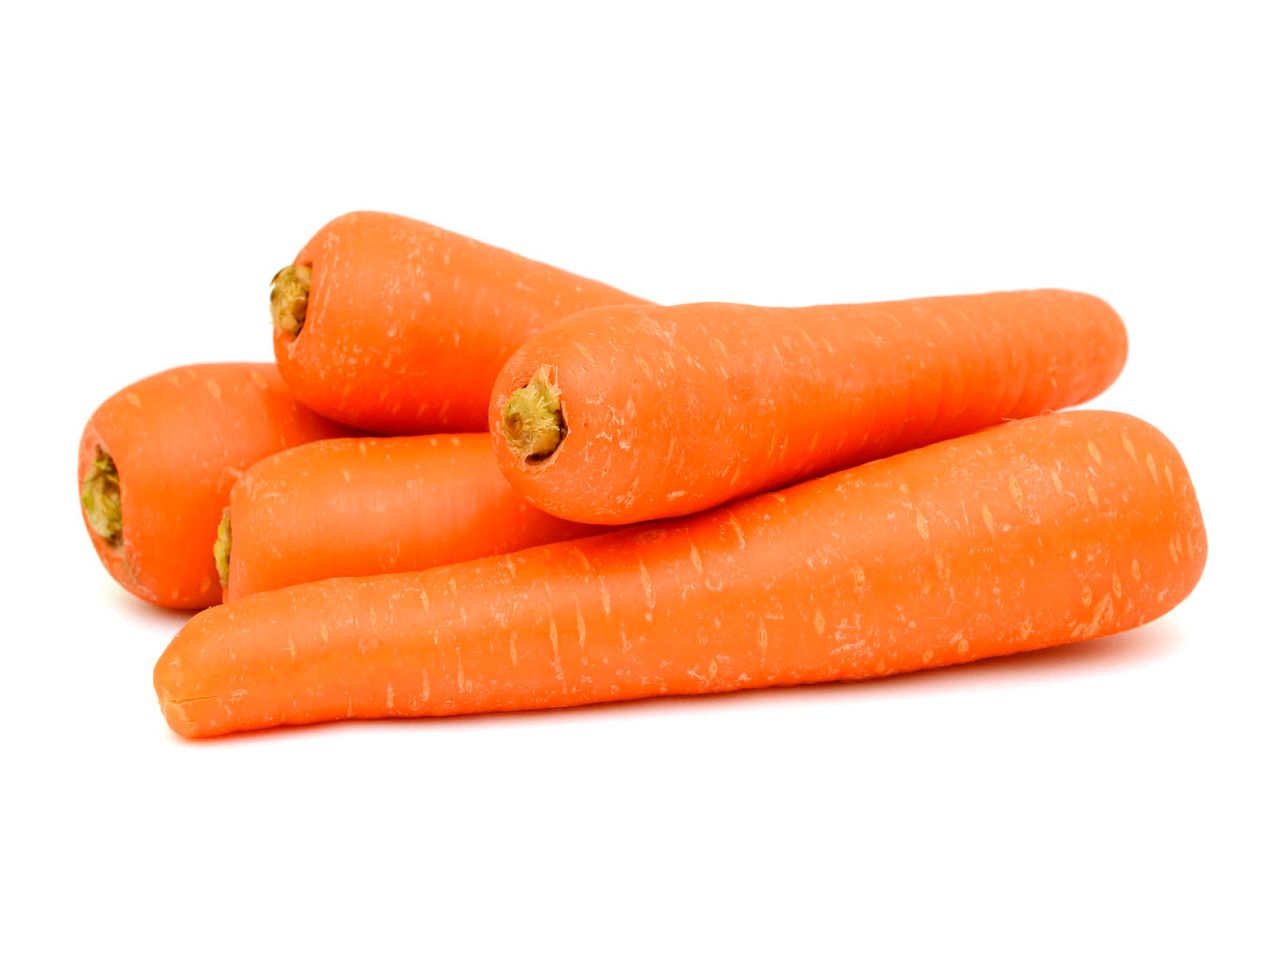 Go to full screen view: Loose Carrots - Image 1